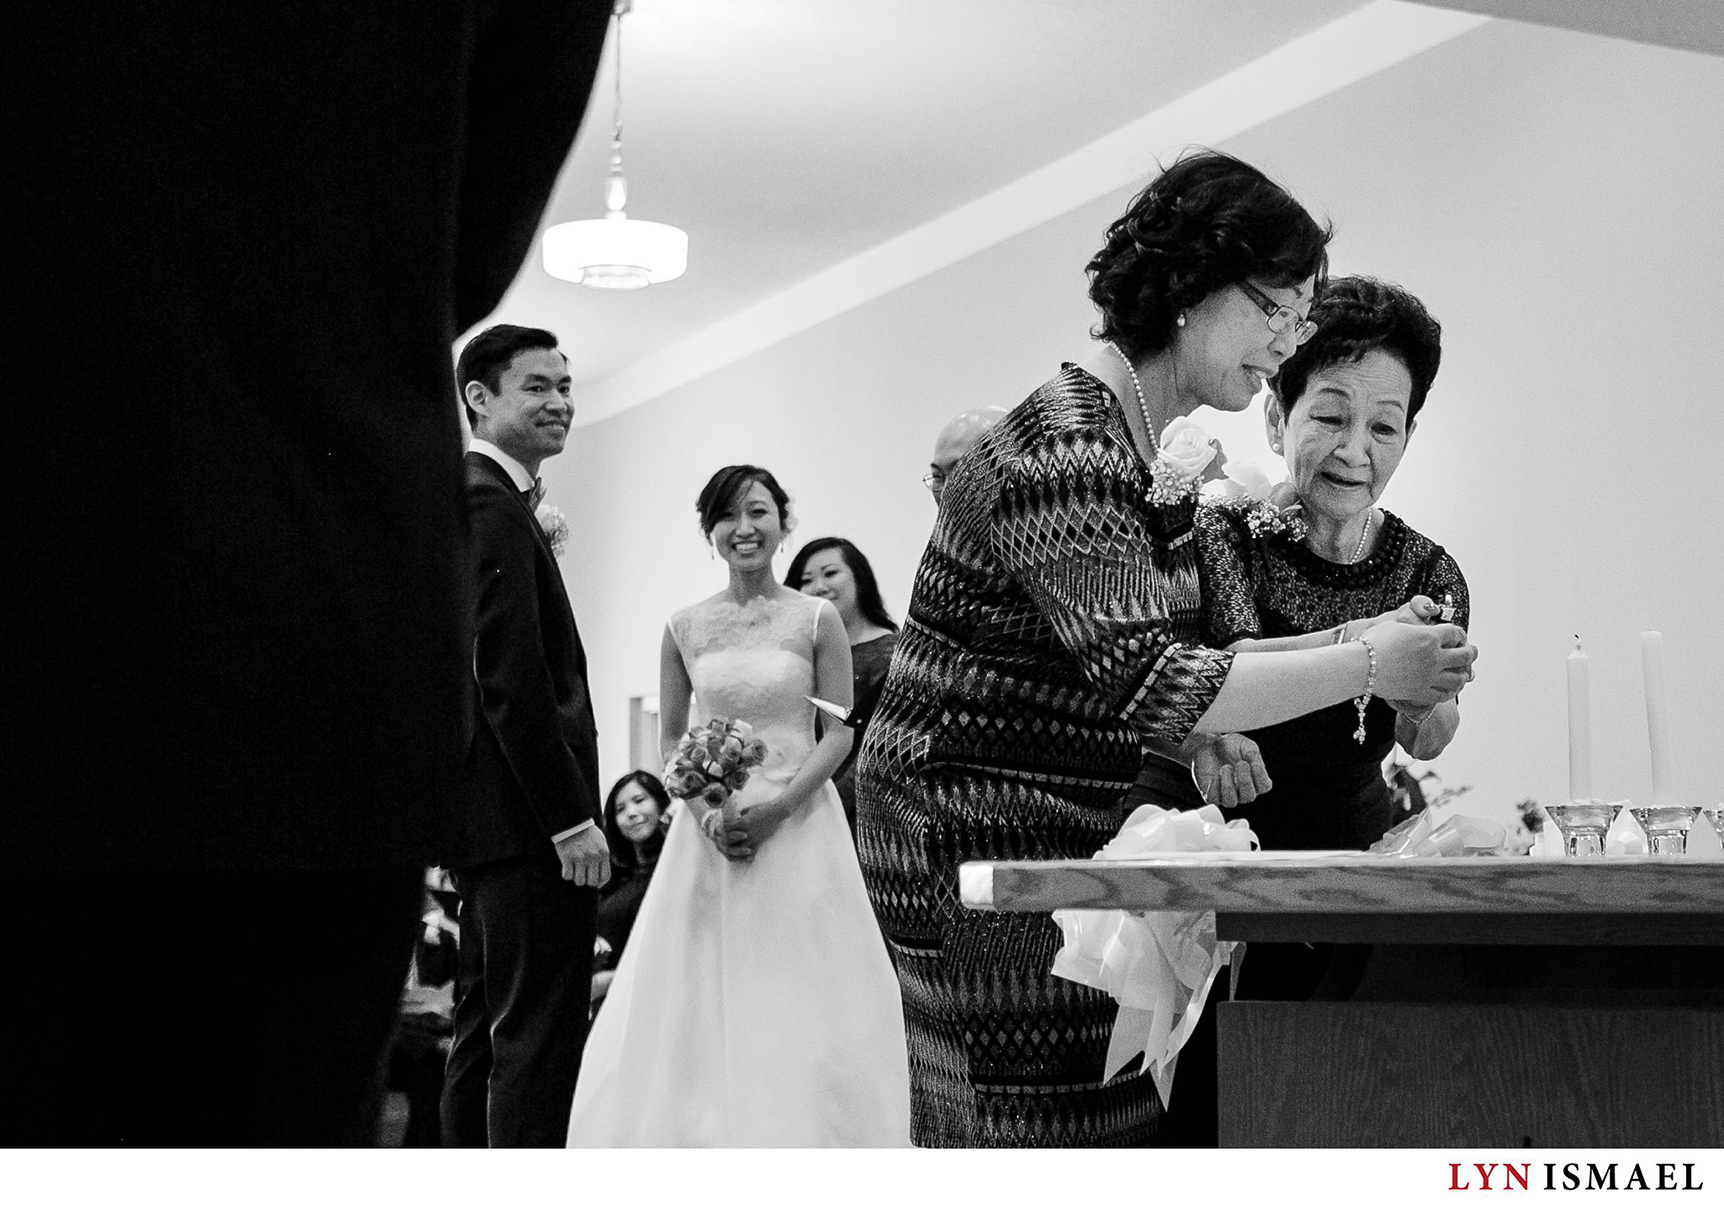 Groom's mother and the bride's grandmother light a candle at a wedding cereomy at the Chinese Gospel Church in Scarborough, Ontario.